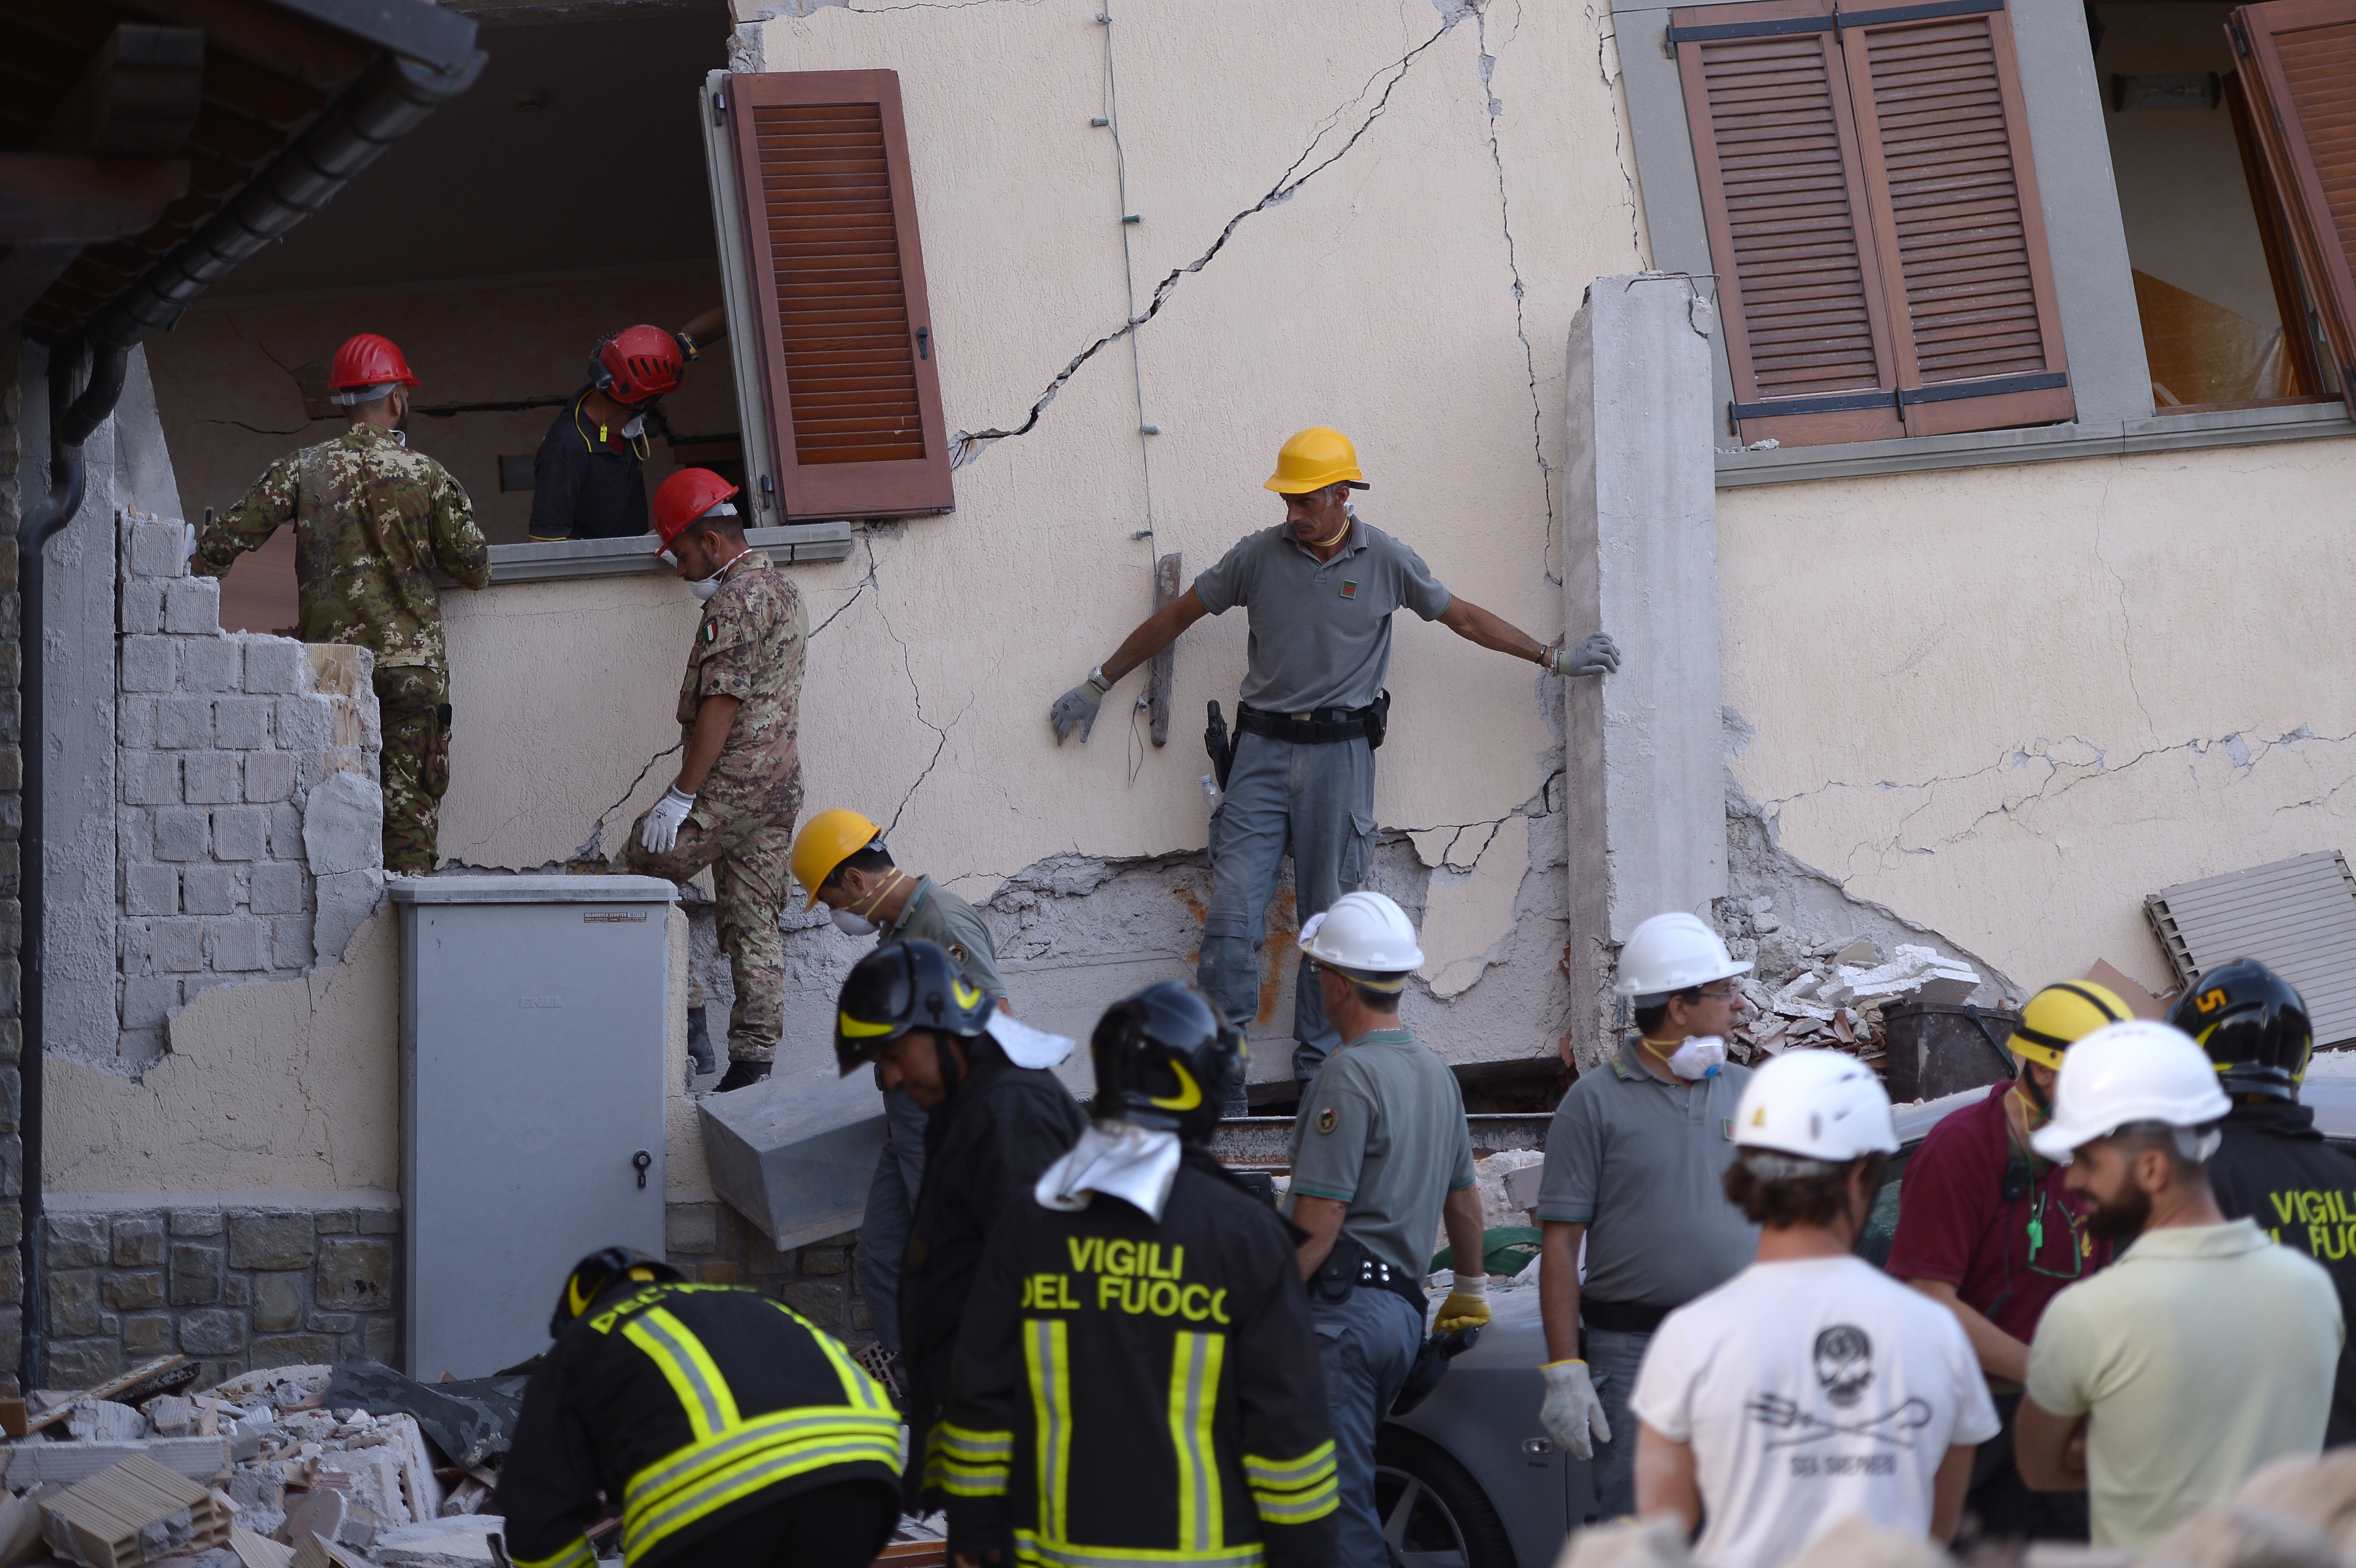 Volunteers assist rescue and emergency services personnel at the damaged Hotel Rome in the central Italian village of Amatrice, on August 25, 2016, a day after a 6.2-magnitude earthquake struck the region killing some 247 people. The death toll from a powerful earthquake in central Italy rose to 247 on August 25, 2016 amid fears many more corpses would be found in the rubble of devastated mountain villages. Rescuers sifted through collapsed masonry in the search for survivors, but their grim mission was clouded by uncertainty about exactly how many people had been staying in communities closest to the epicentre of the quake of August 24.  / AFP PHOTO / FILIPPO MONTEFORTE